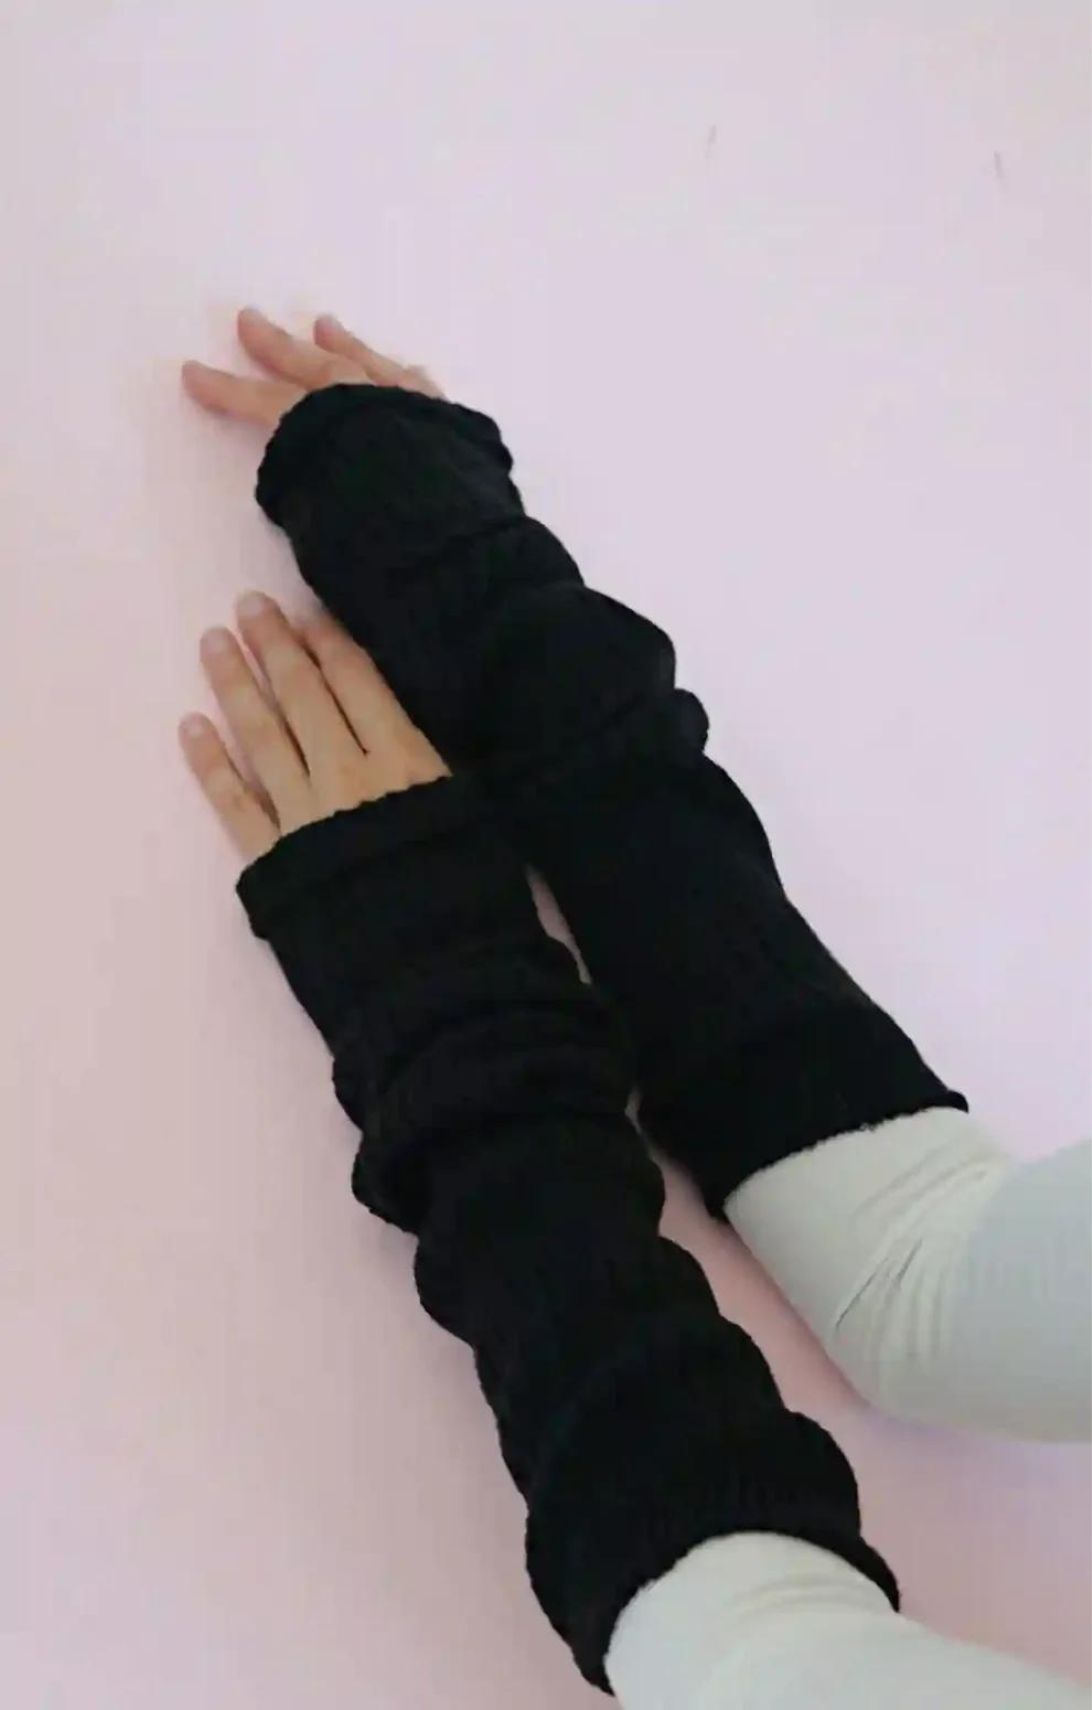 Woman's arm wearing ivory colored TOPS with black color of TABBISOCKS brand Wool Blend Leg and Arm Warmers